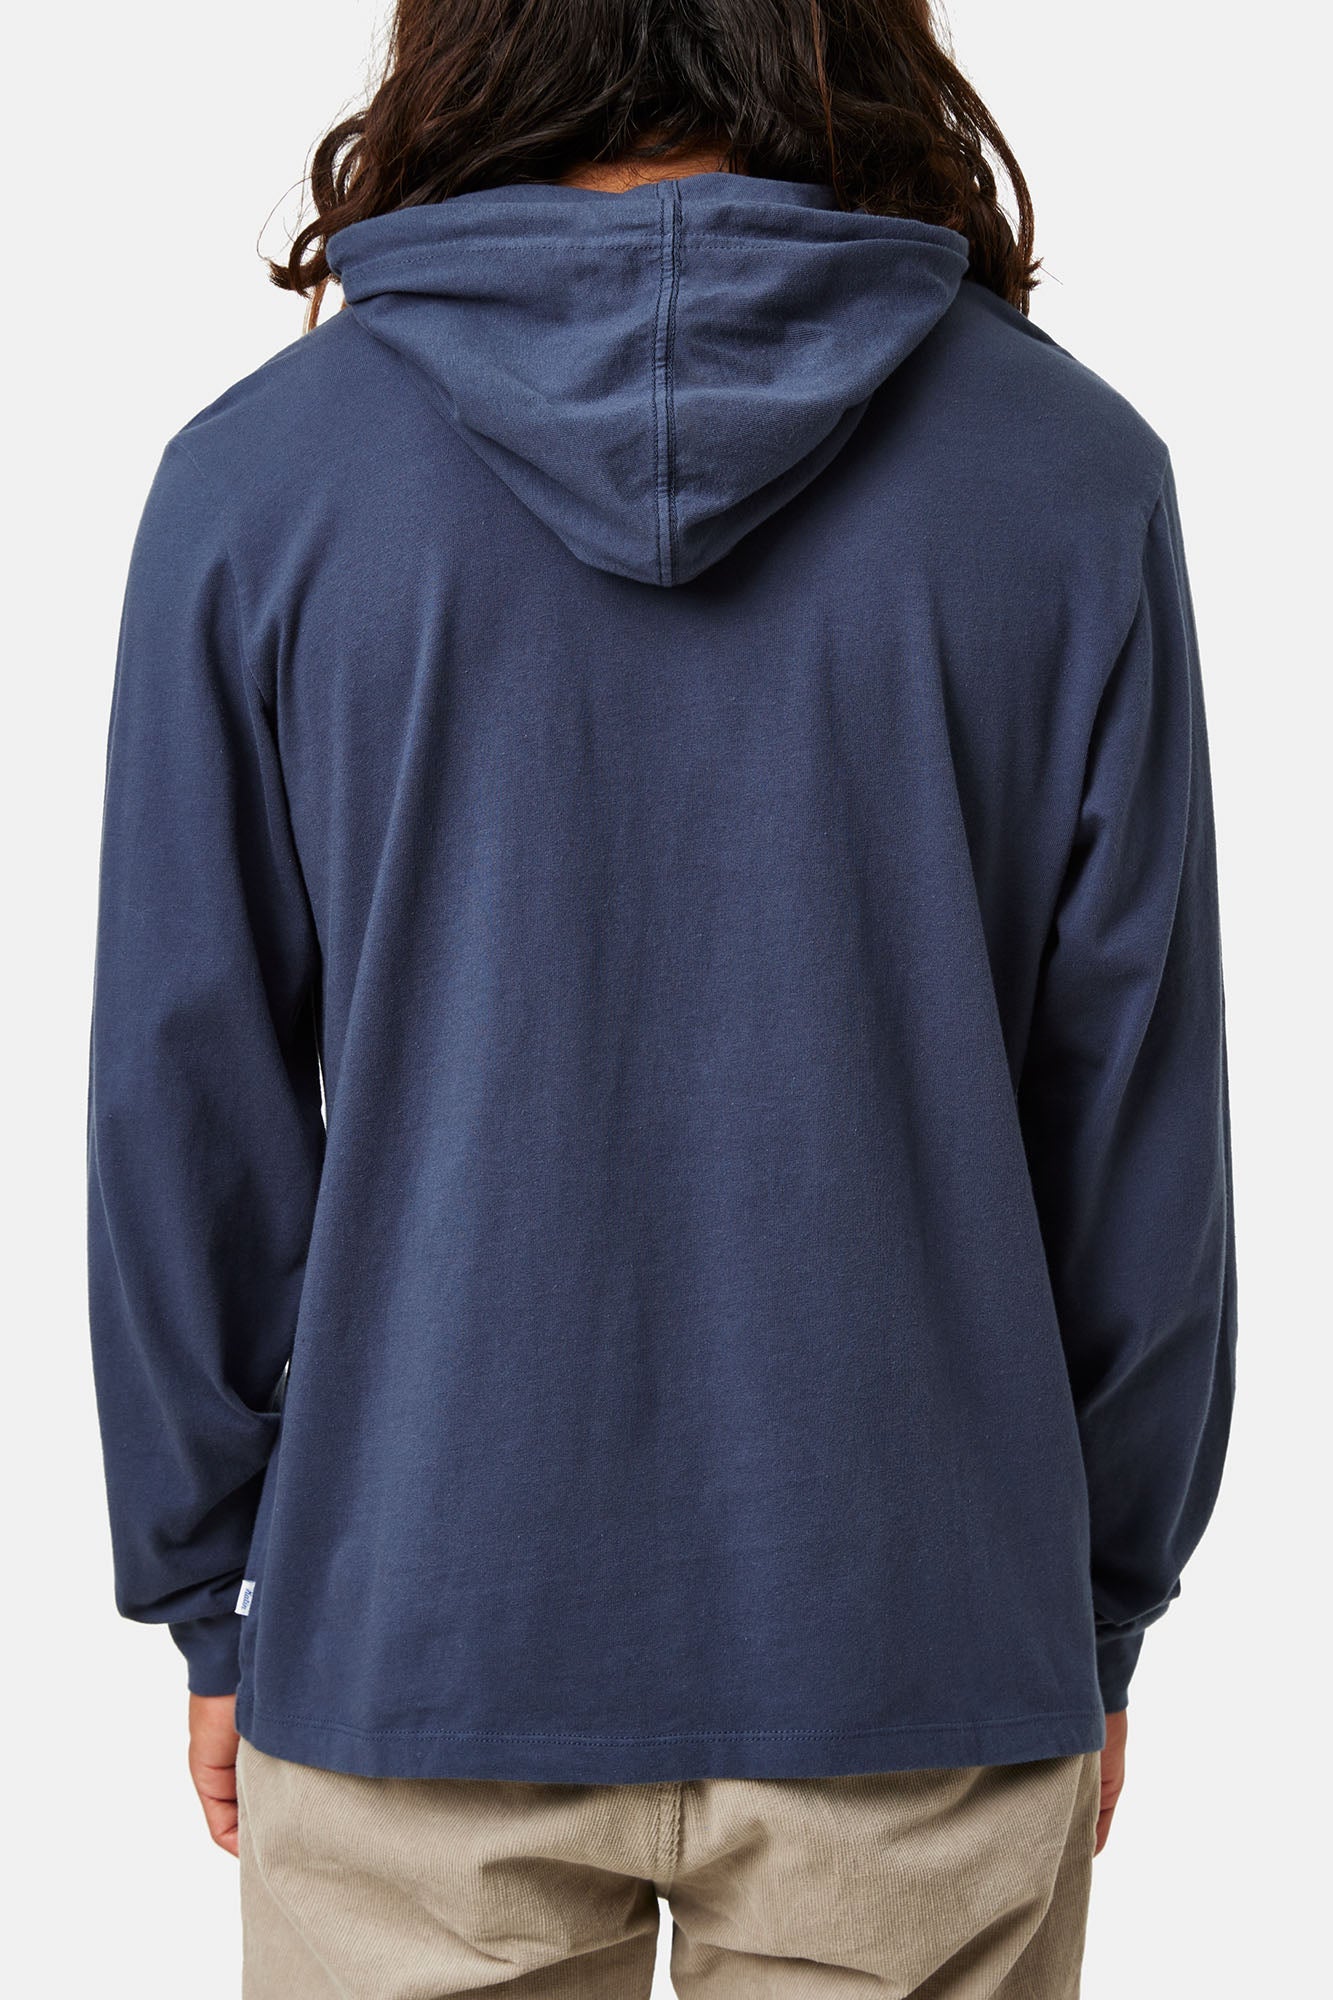 Katin M LS Hide Pullover BALTIC BLUE